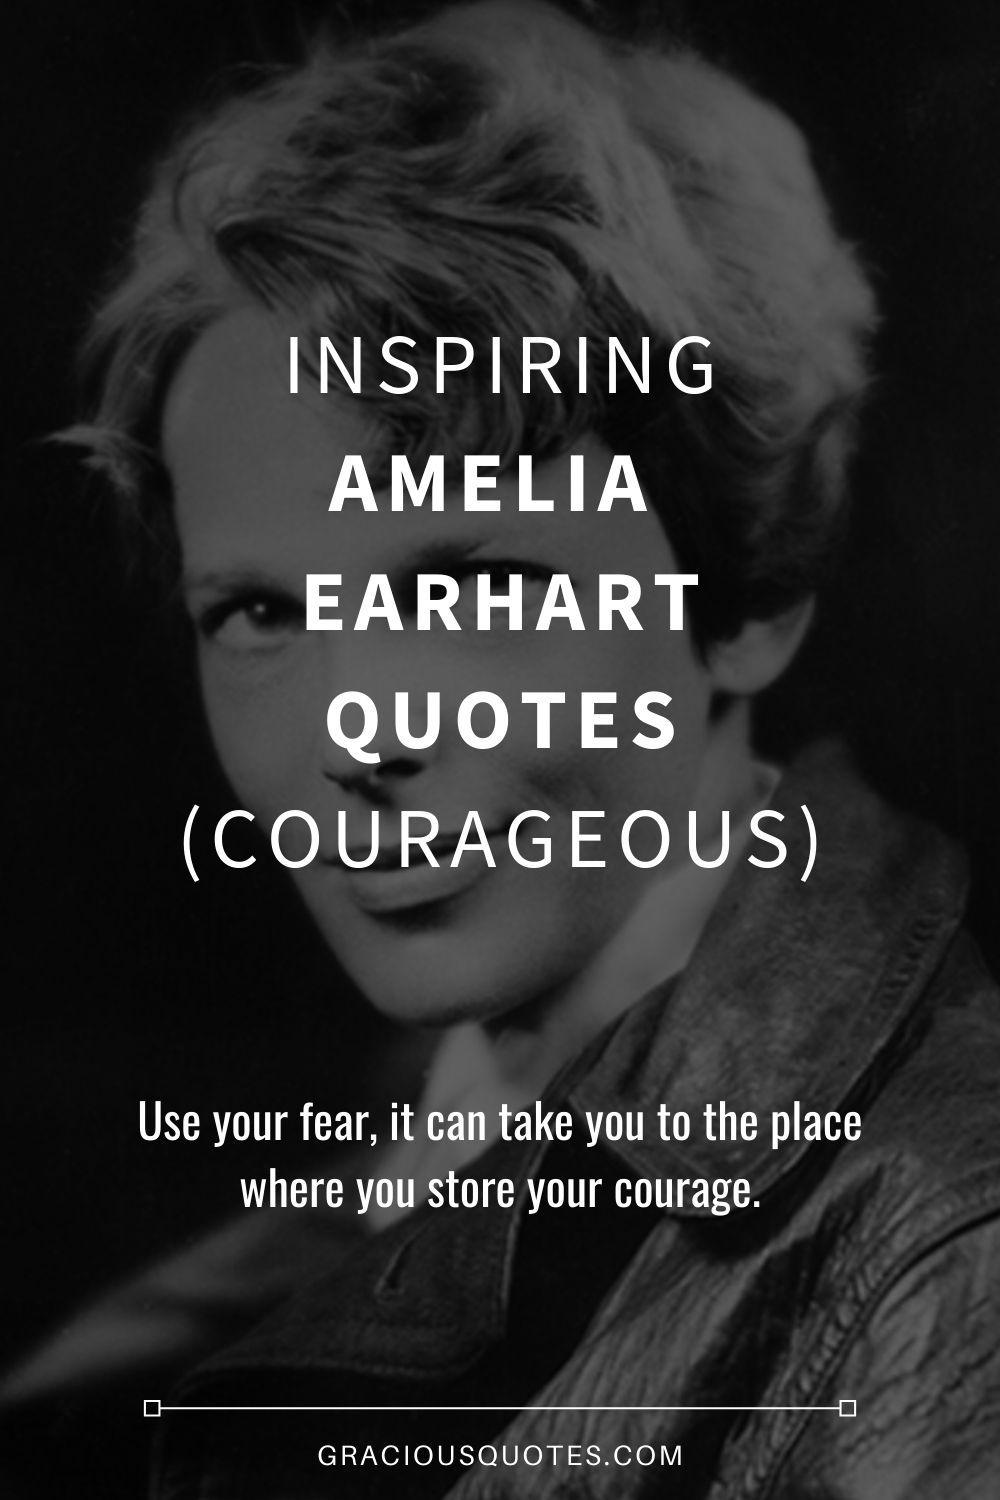 Inspiring Amelia Earhart Quotes (COURAGEOUS) - Gracious Quotes